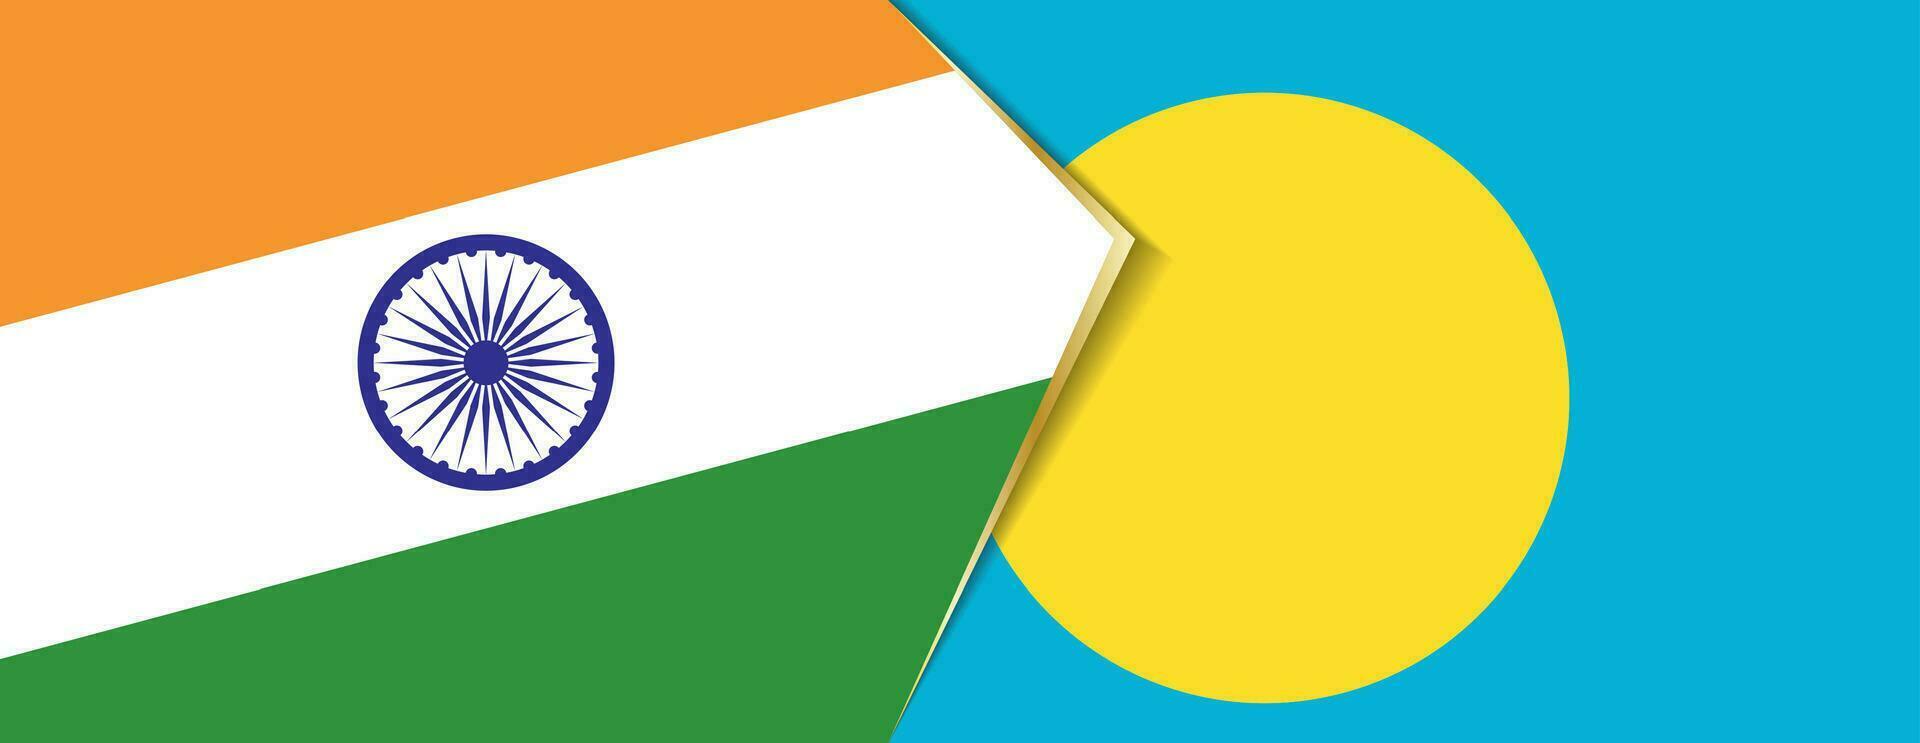 India and Palau flags, two vector flags.